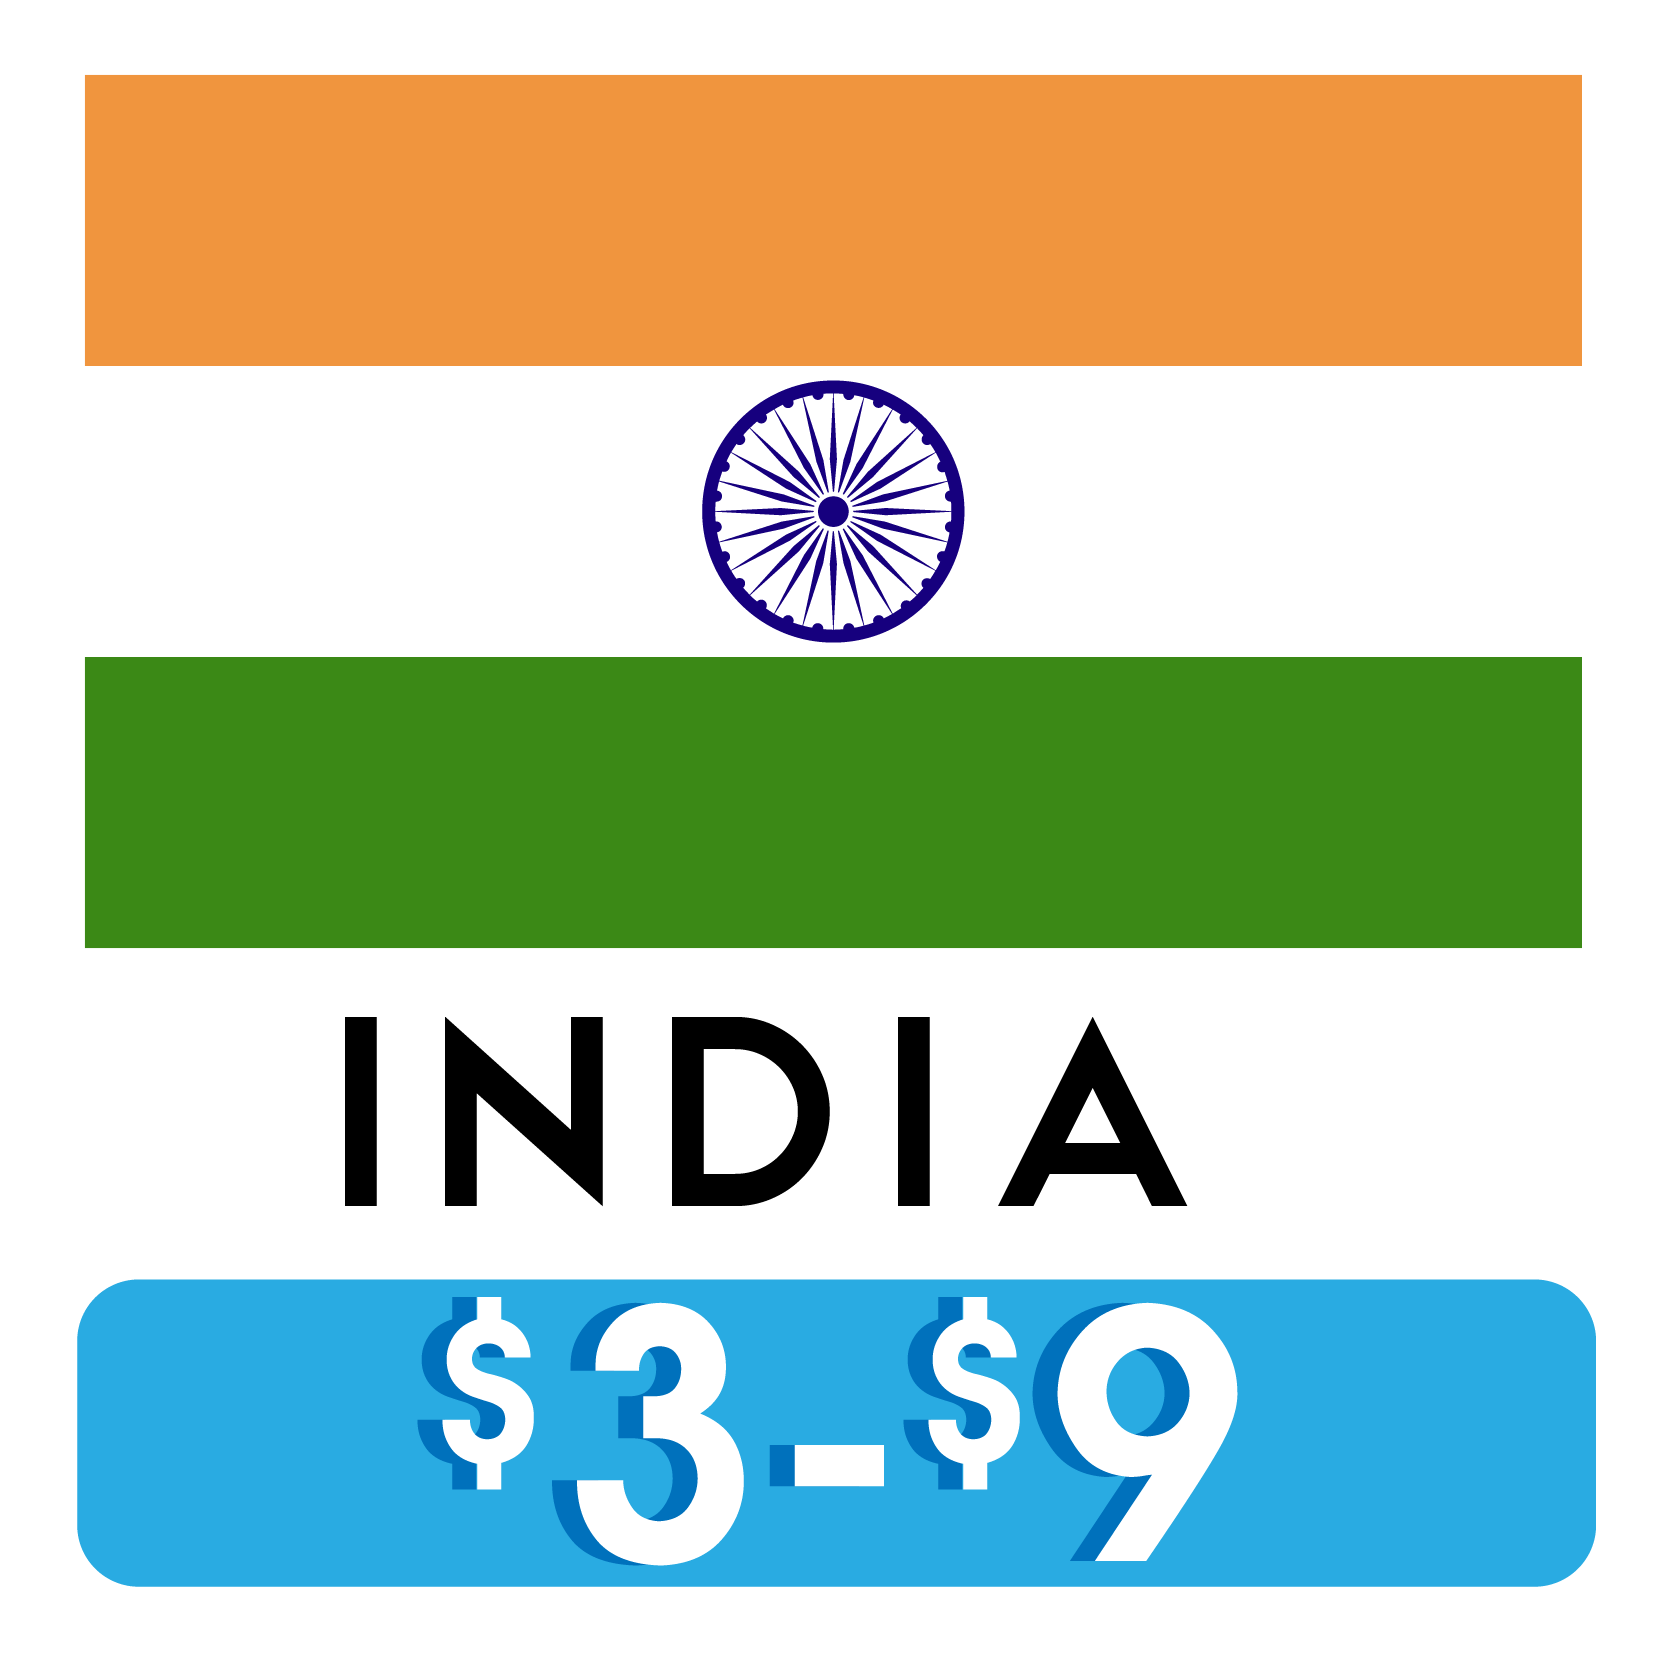 Costos_Hostales_India.png